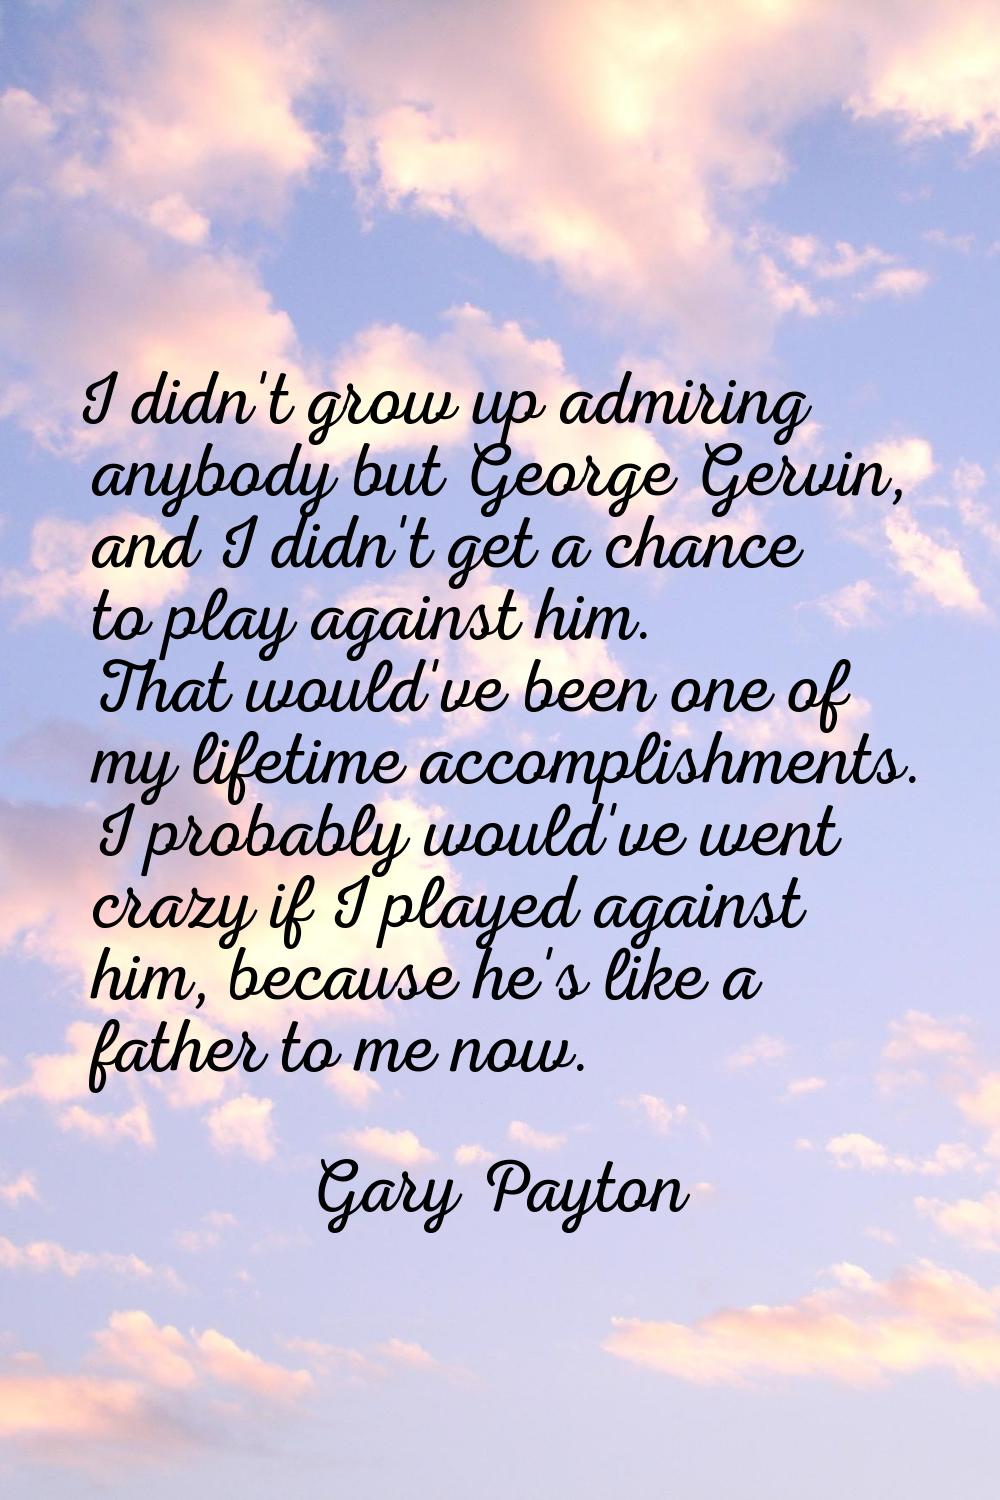 I didn't grow up admiring anybody but George Gervin, and I didn't get a chance to play against him.